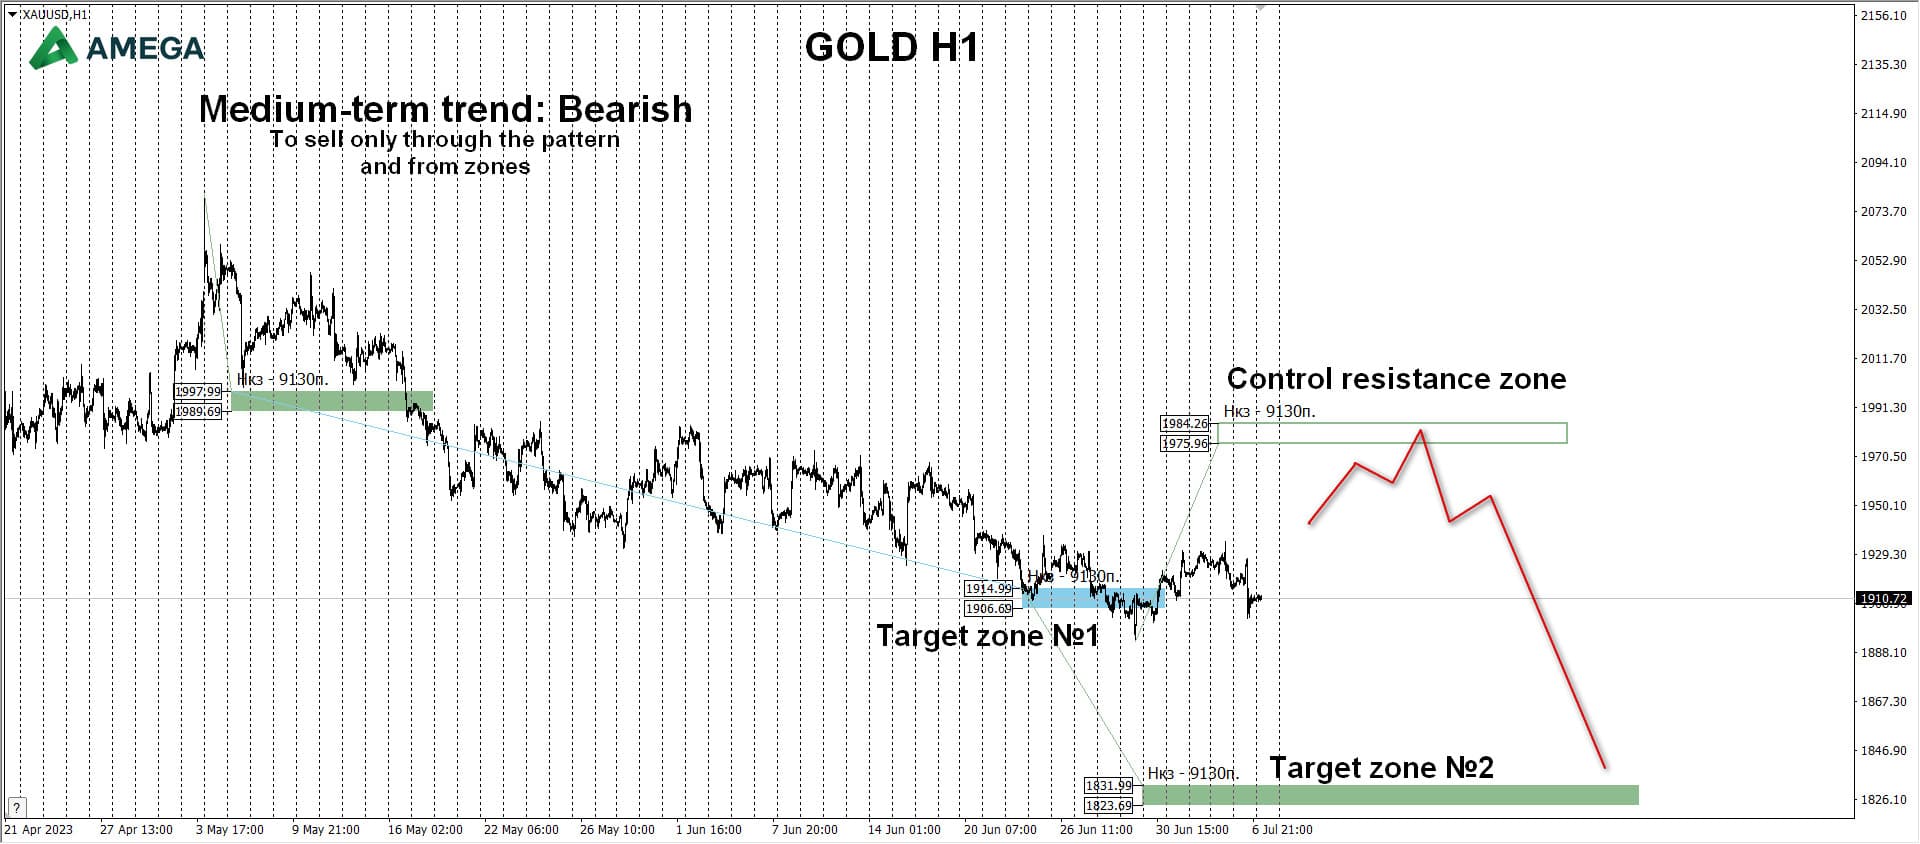 Gold: The price has already reached the target zone №1 1914.99-1906.69